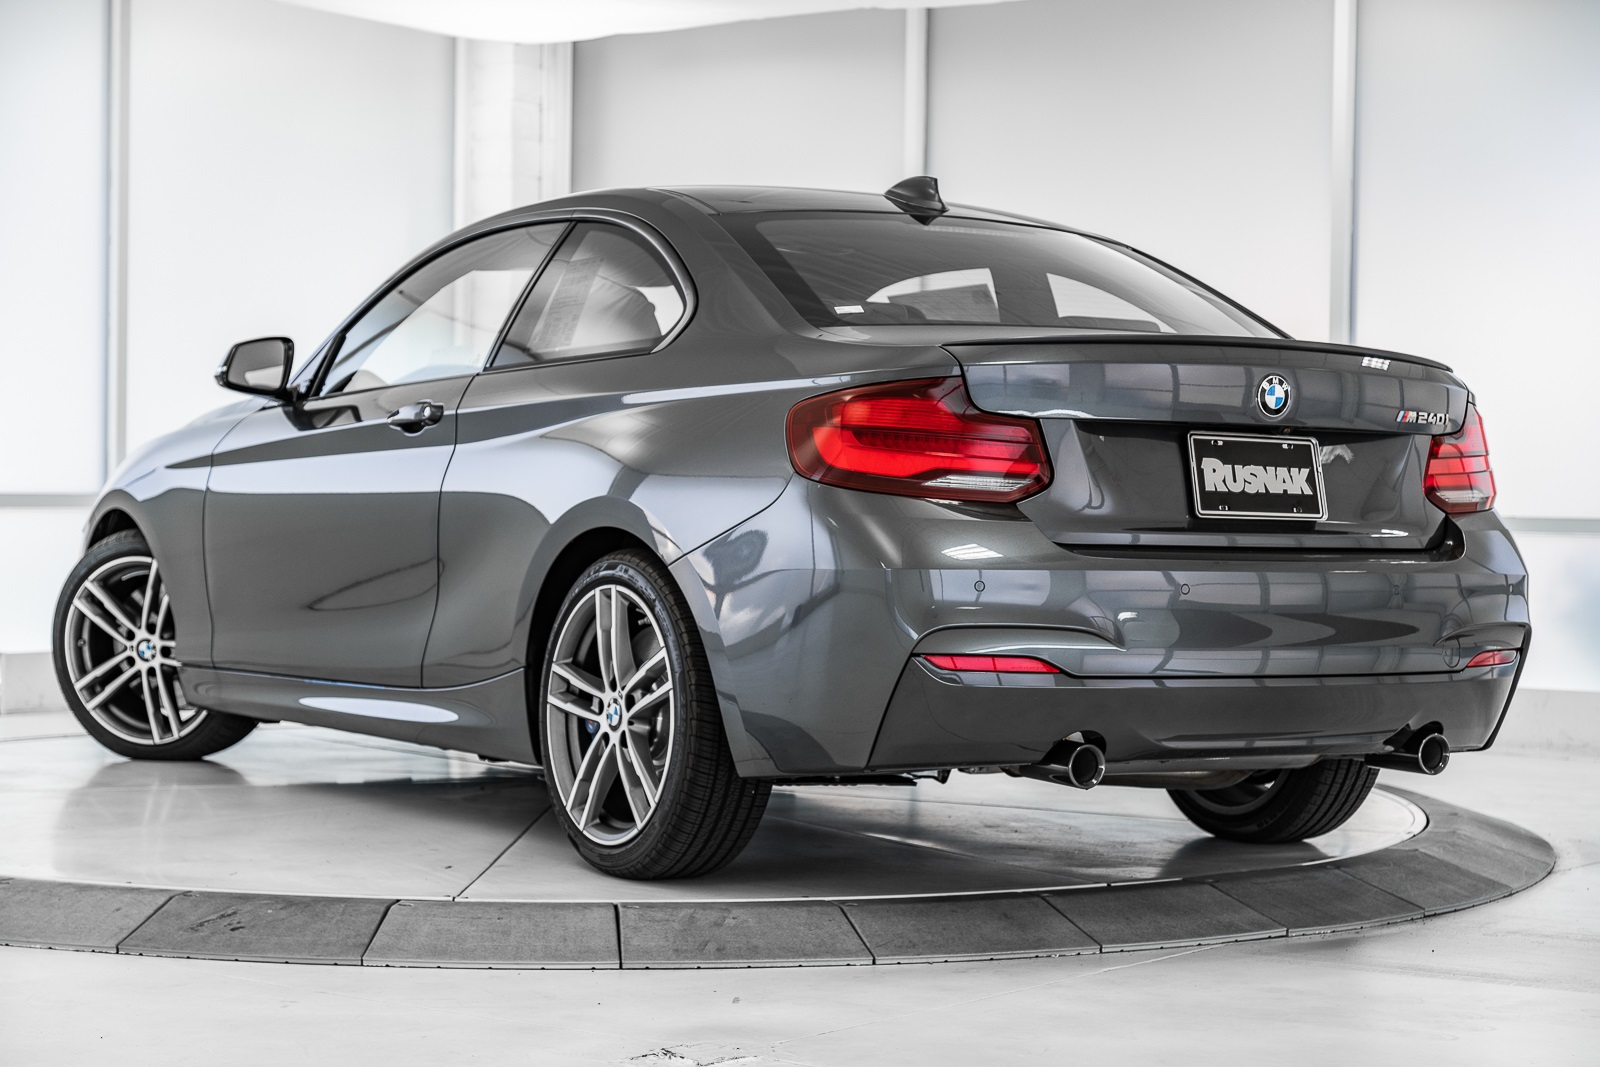 New 2020 Bmw 2 Series M240i 2d Coupe In Thousand Oaks 24200110 6515